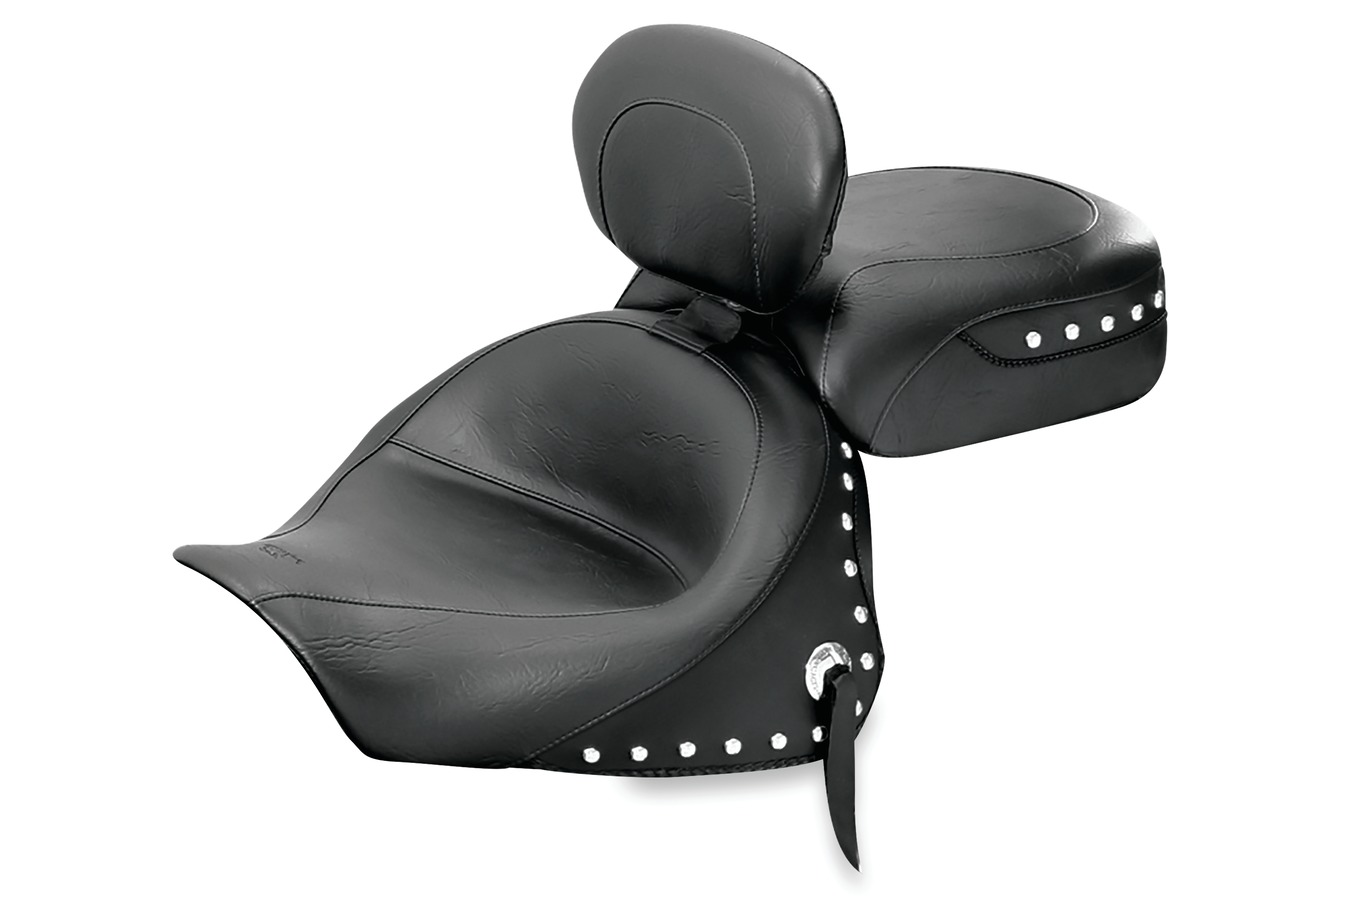 Standard Touring Two-Piece Seat with Driver Backrest for Kawasaki Vulcan 1600 Classic 2003-